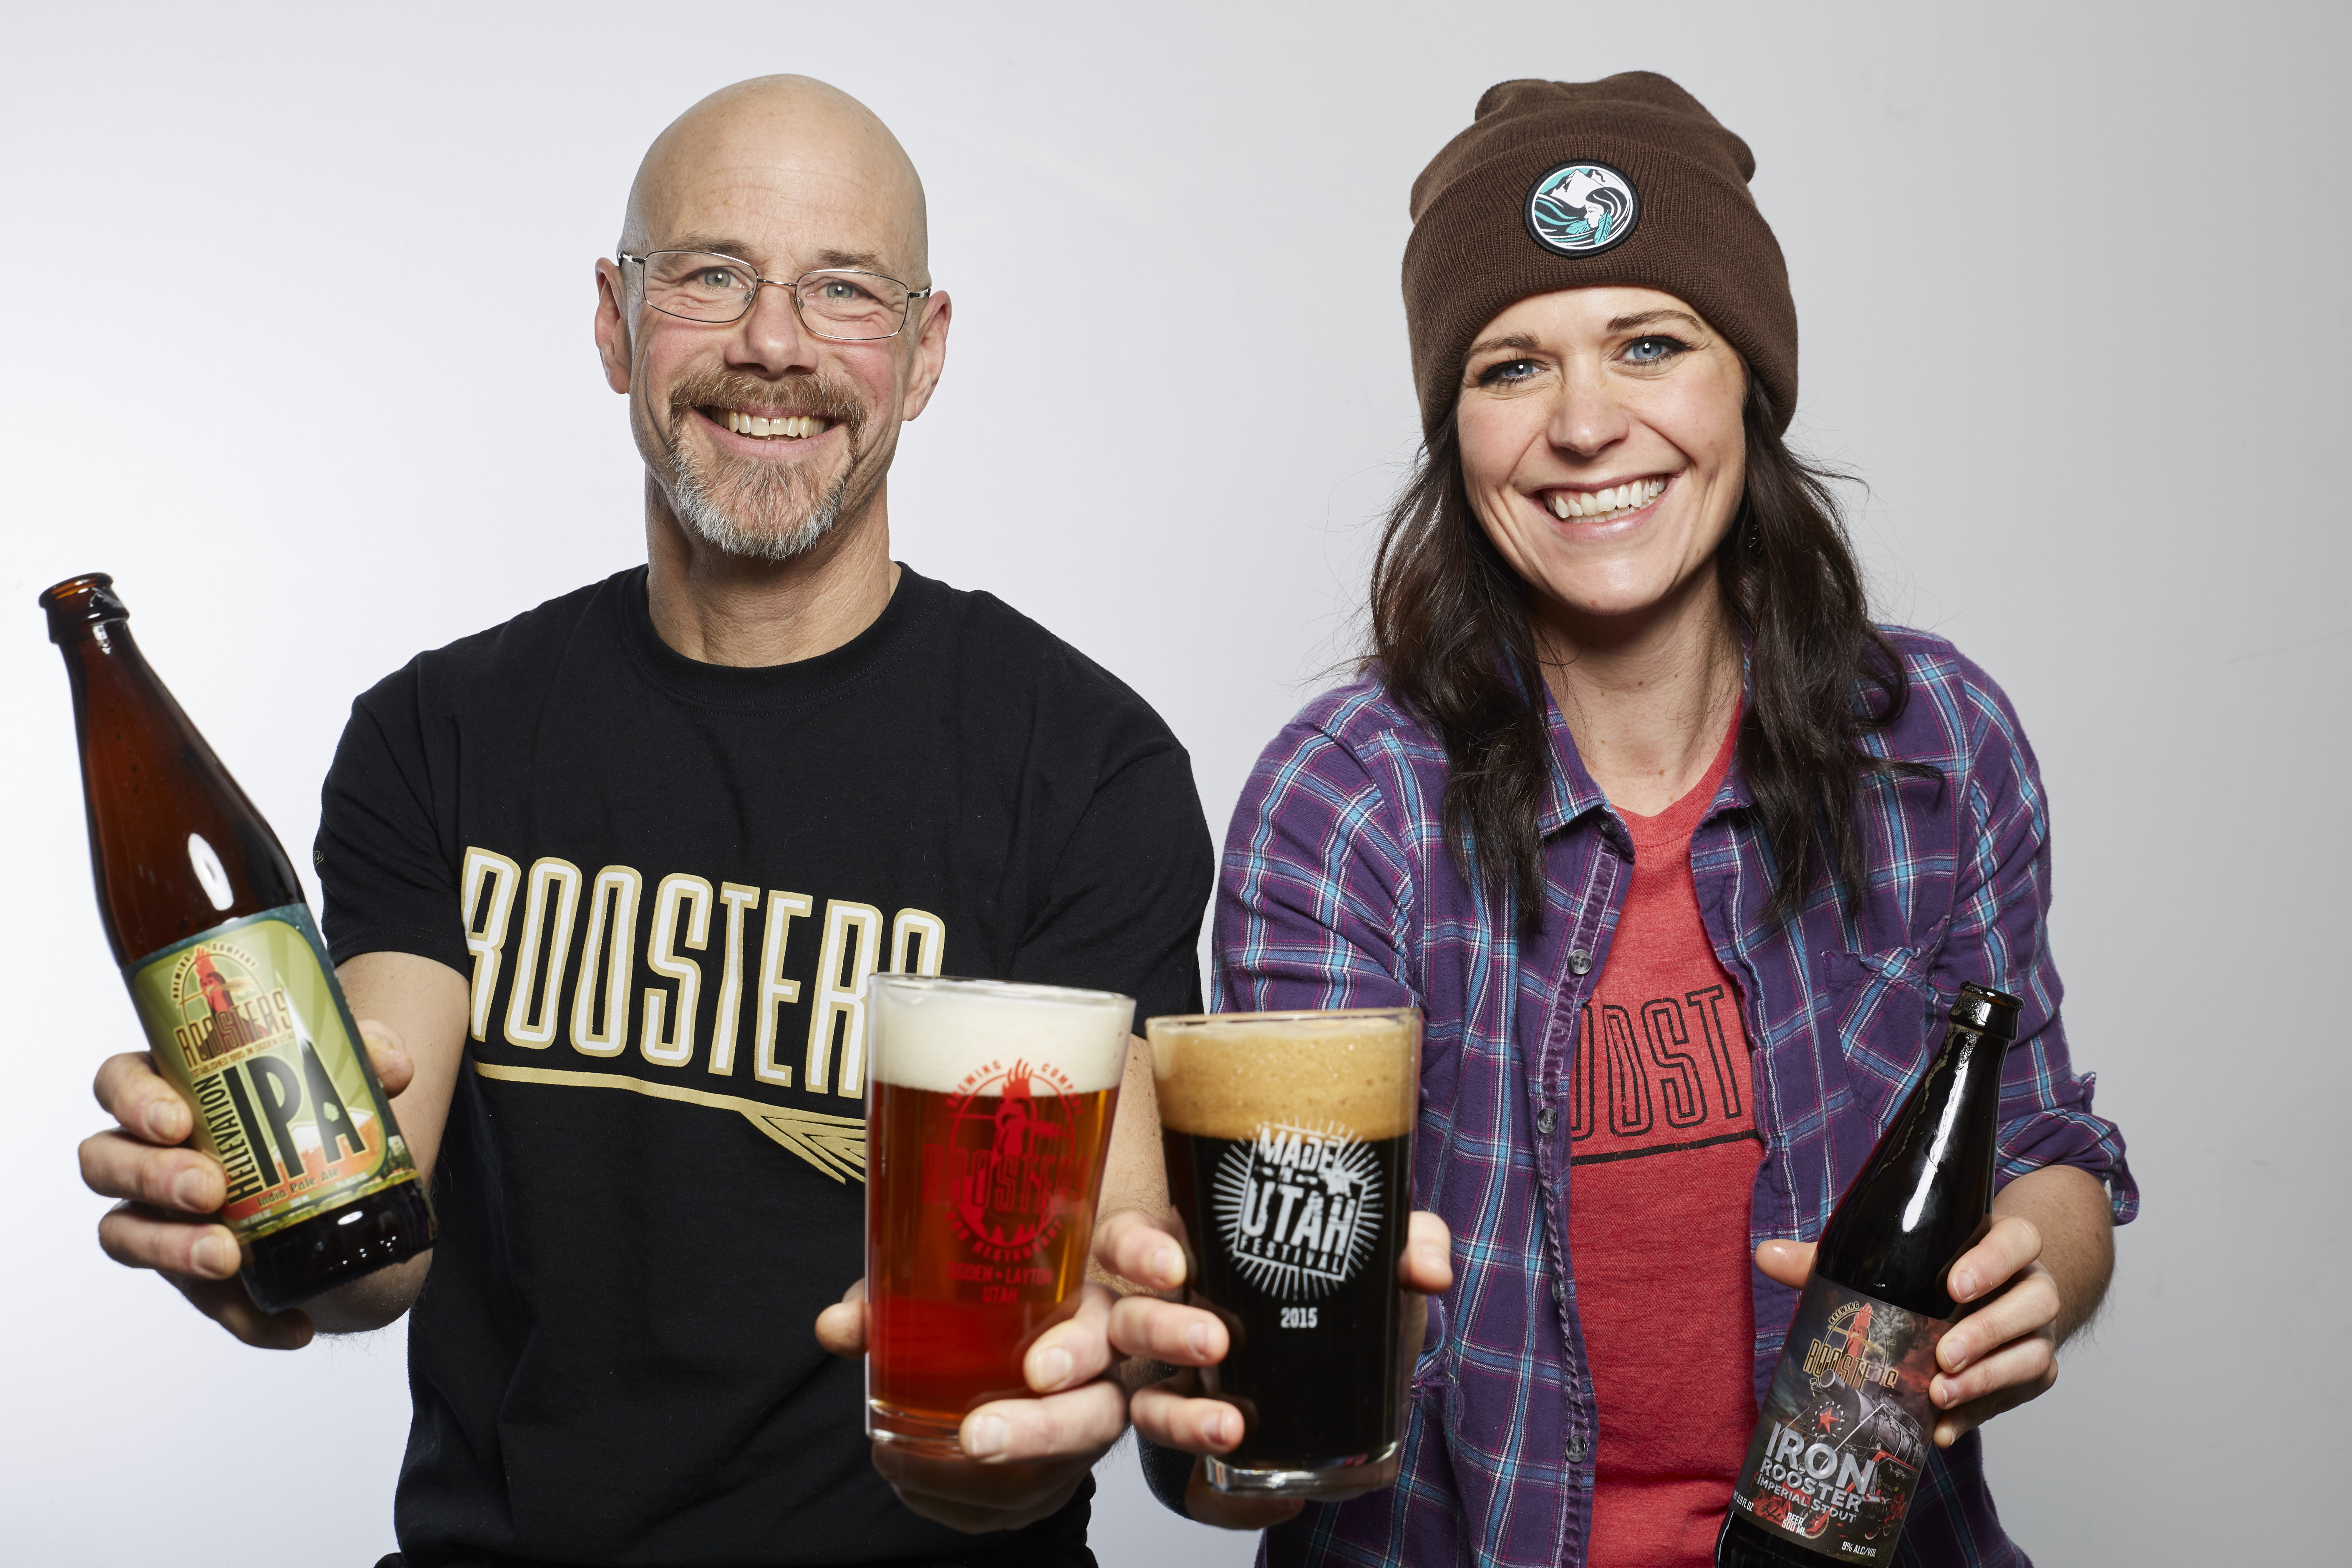 Roosters Brewing Company Continues to Shine with Awesome Brews